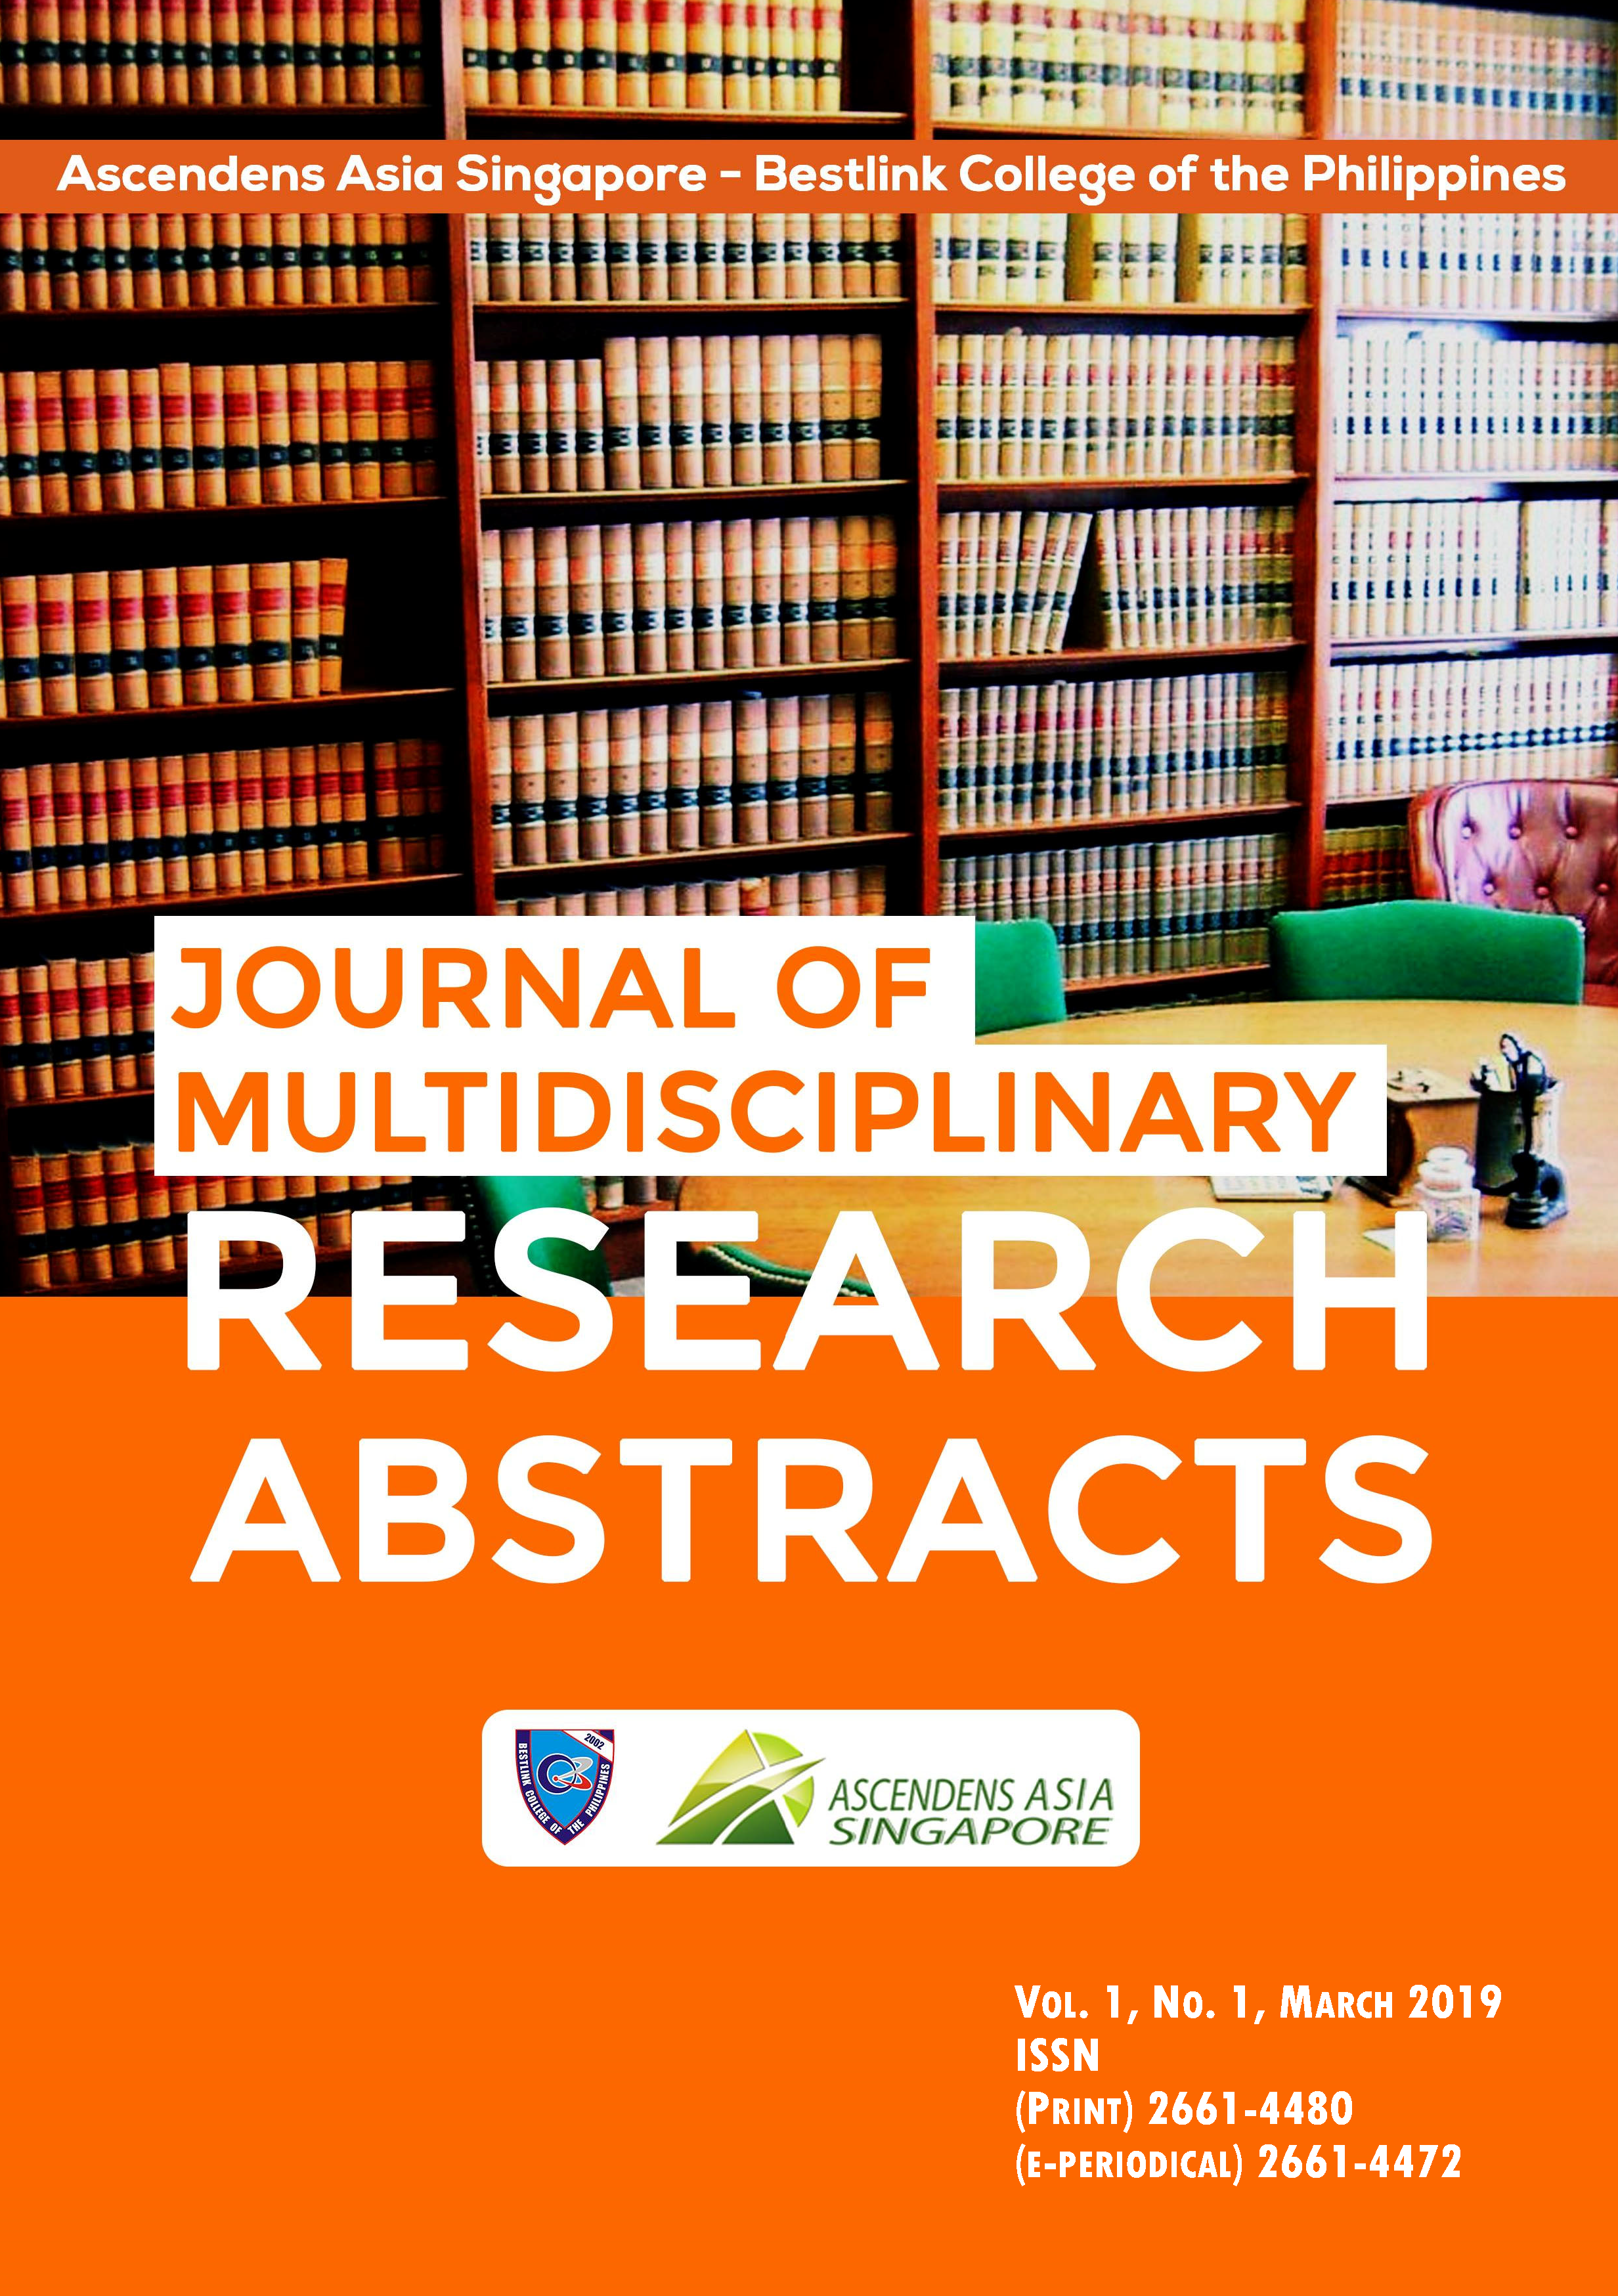 					View Vol. 1 No. 1 (2019): Ascendens Asia Singapore – Bestlink College of the Philippines Journal of Multidisciplinary Research Abstracts, Vol.1, No.1, March 2019
				